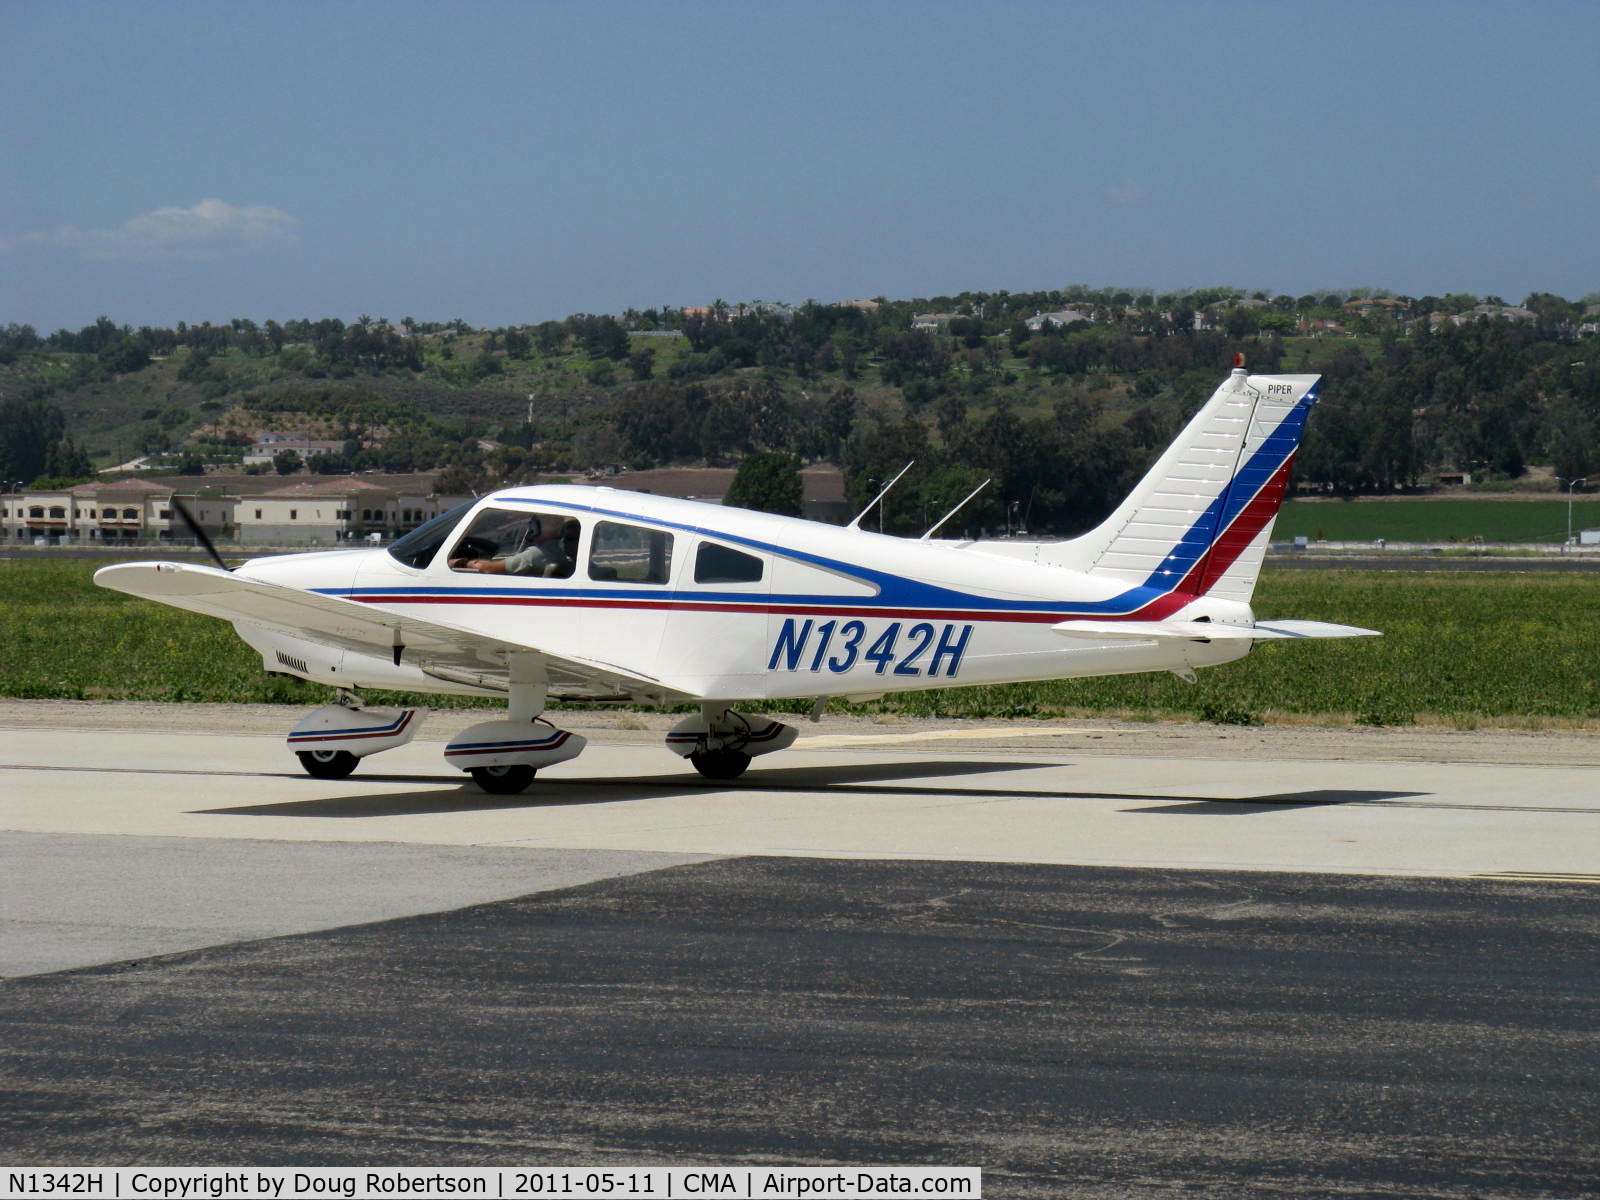 N1342H, 1977 Piper PA-28-181 C/N 28-7790307, 1977 Piper PA-28-181 ARCHER, Lycoming O&VO-360 180 Hp, taxi